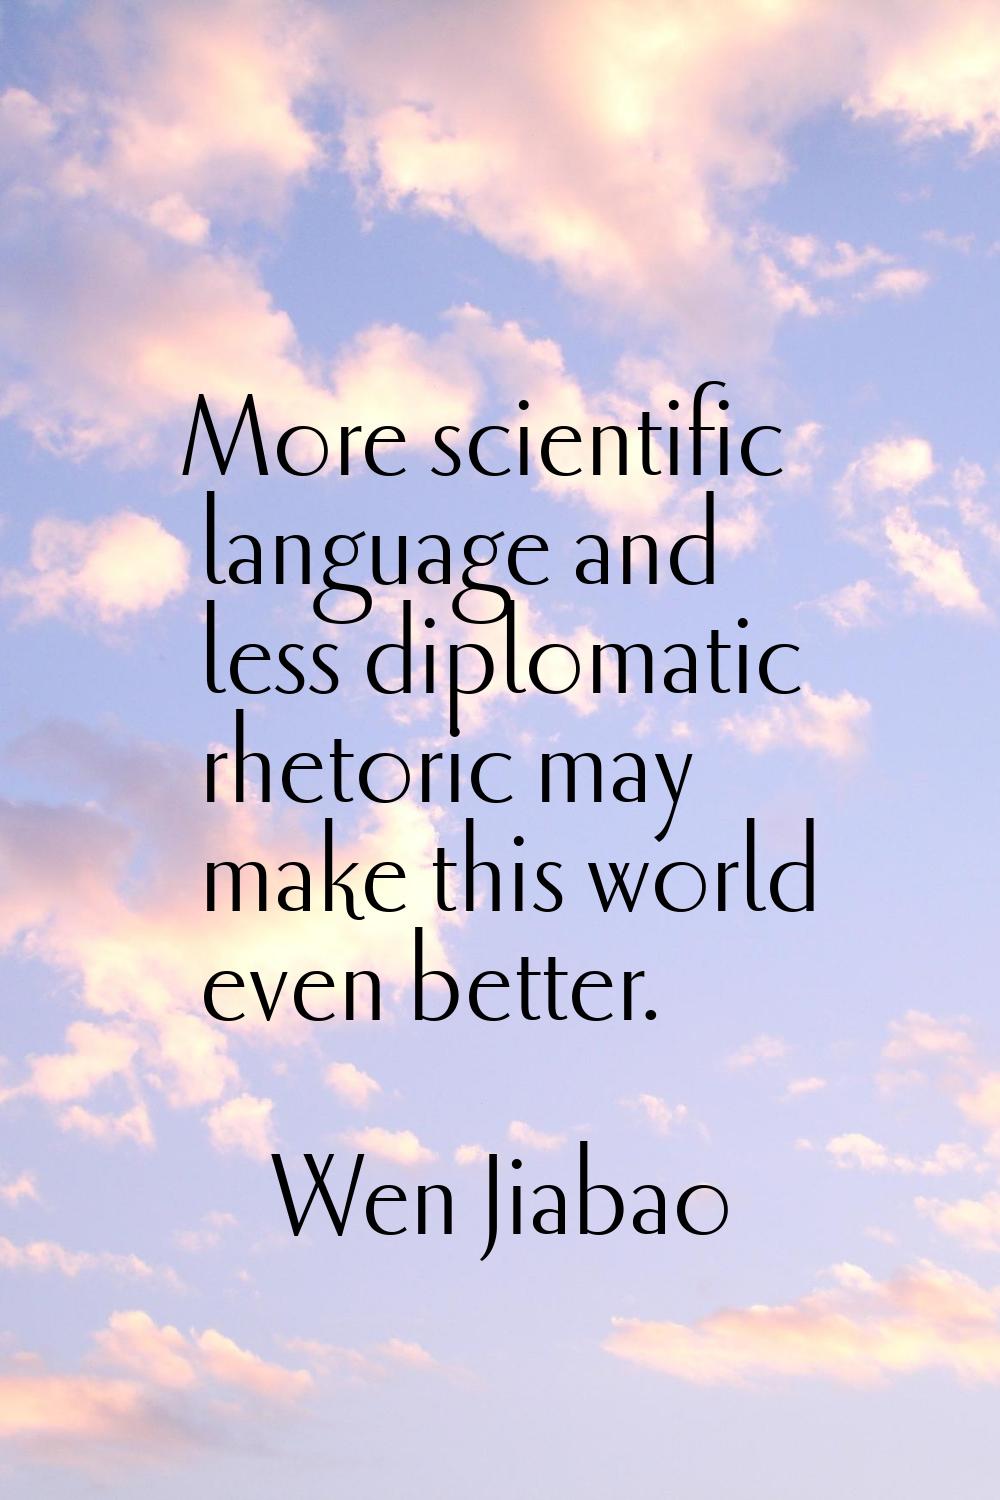 More scientific language and less diplomatic rhetoric may make this world even better.